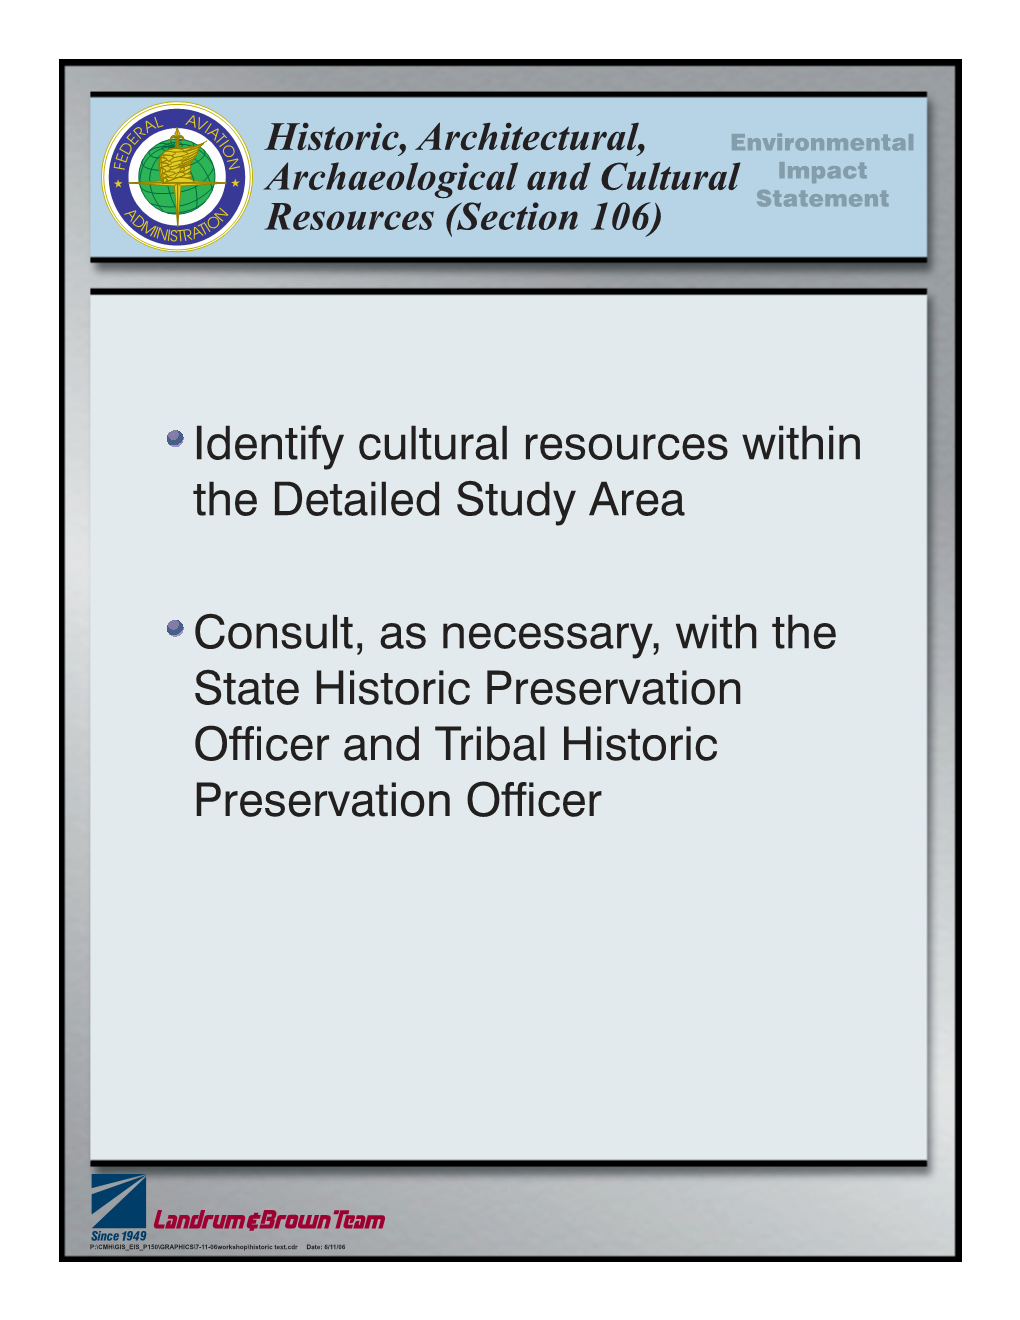 Historic, Architectural, Archaeological and Cultural Resources